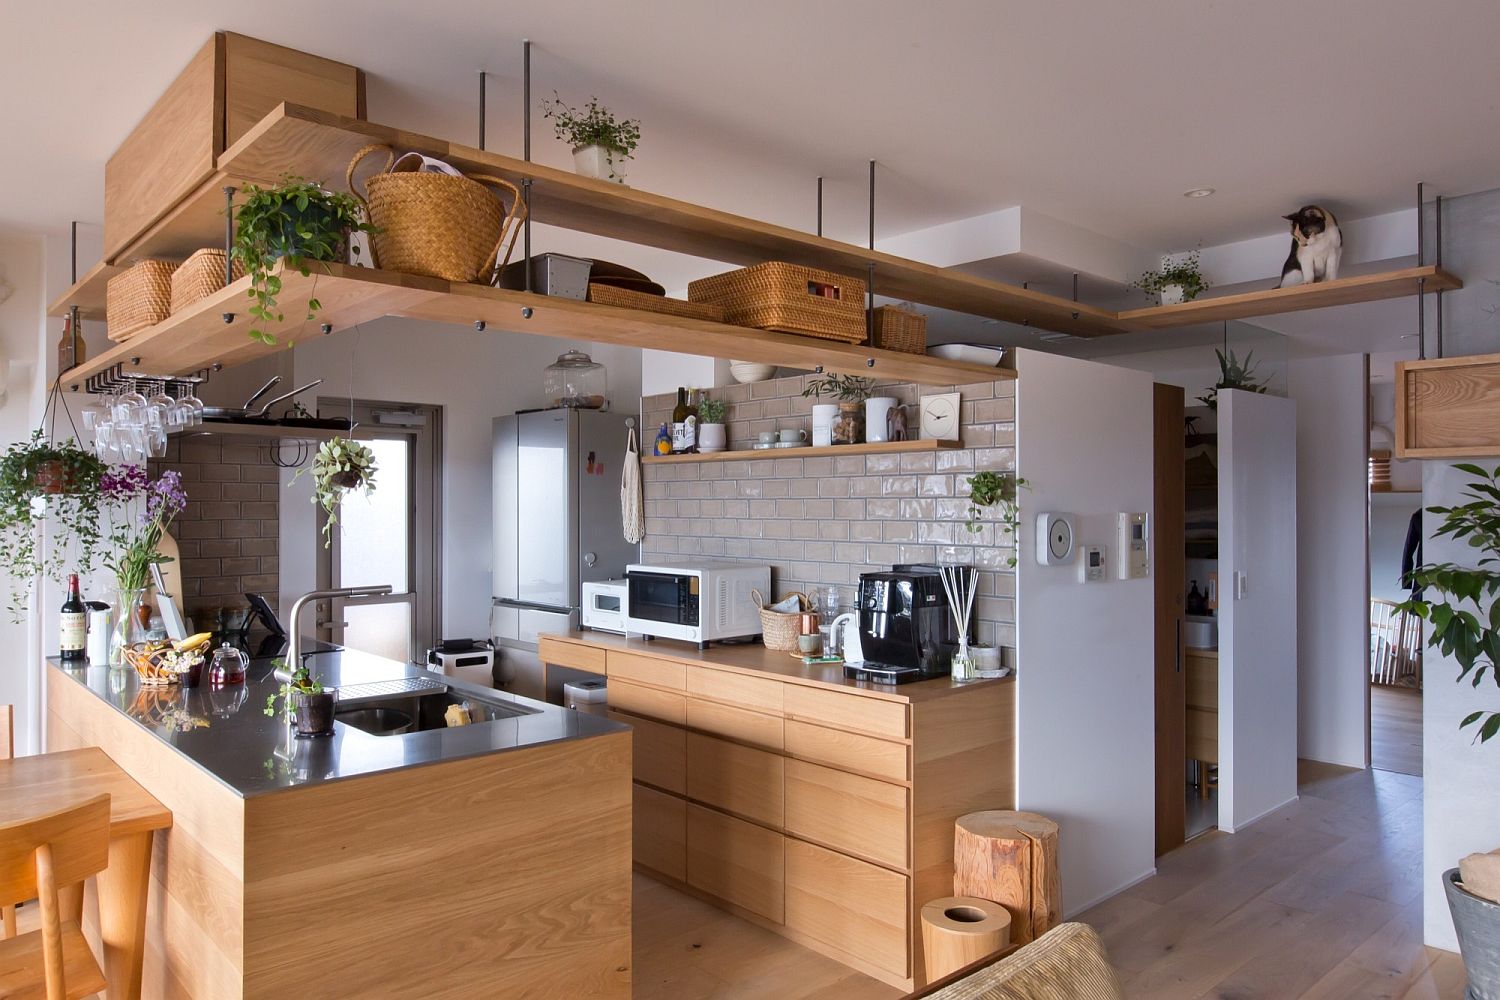 Wooden-shelves-and-wall-mounted-cabinets-offer-storage-space-without-creating-a-clutter